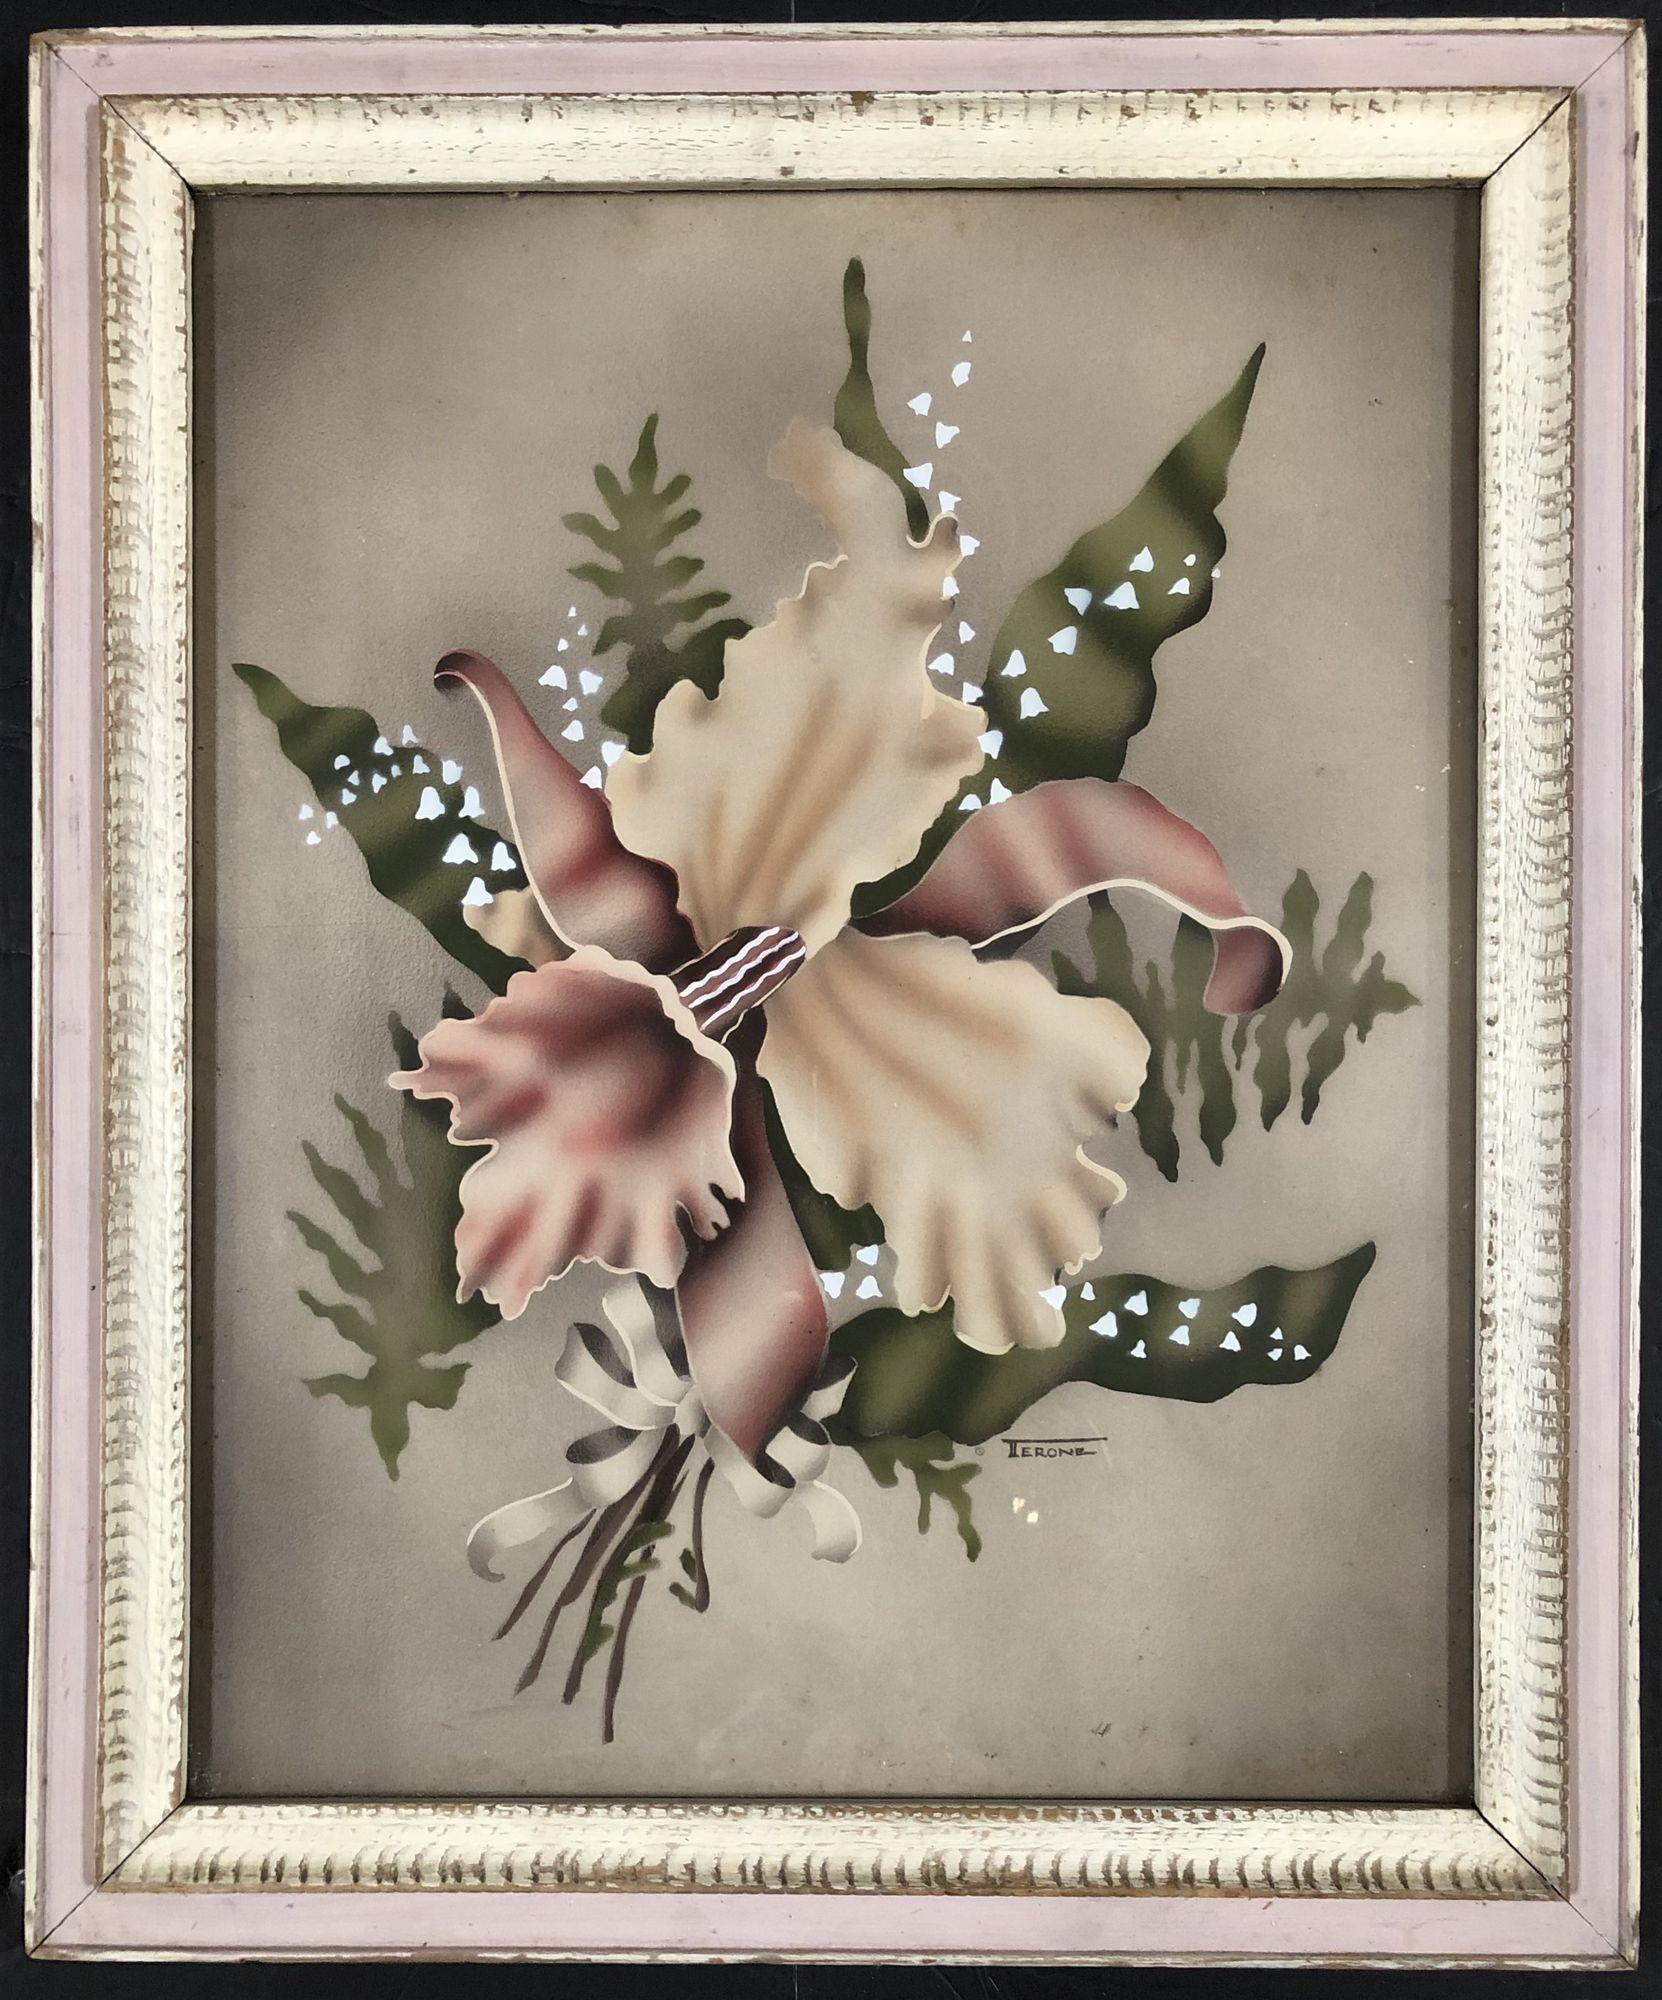 Airbrushed Daffodil Flowers with Bow Mid Century Art Signed by Terone In Excellent Condition For Sale In Van Nuys, CA